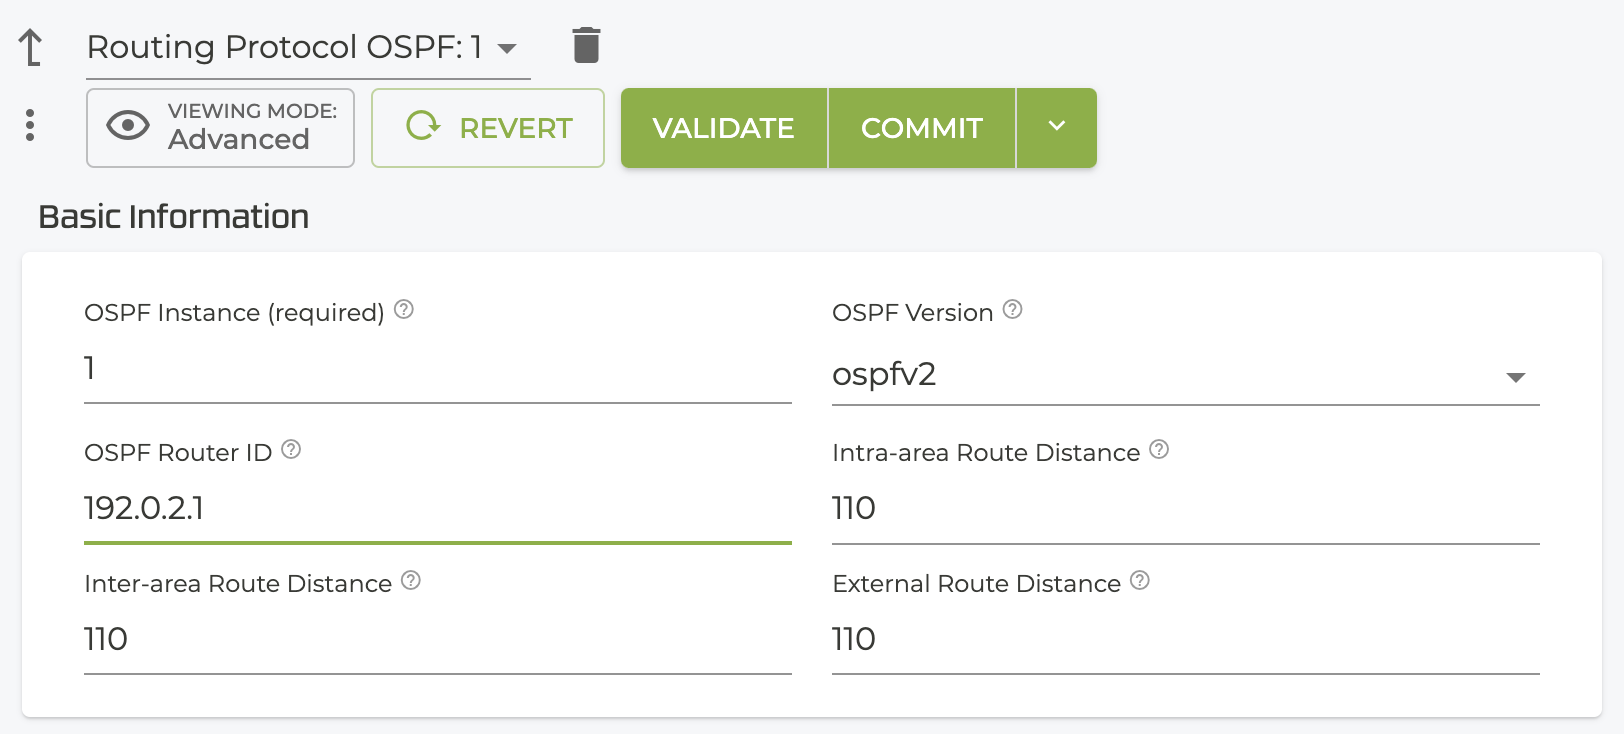 OSPF1 Router ID